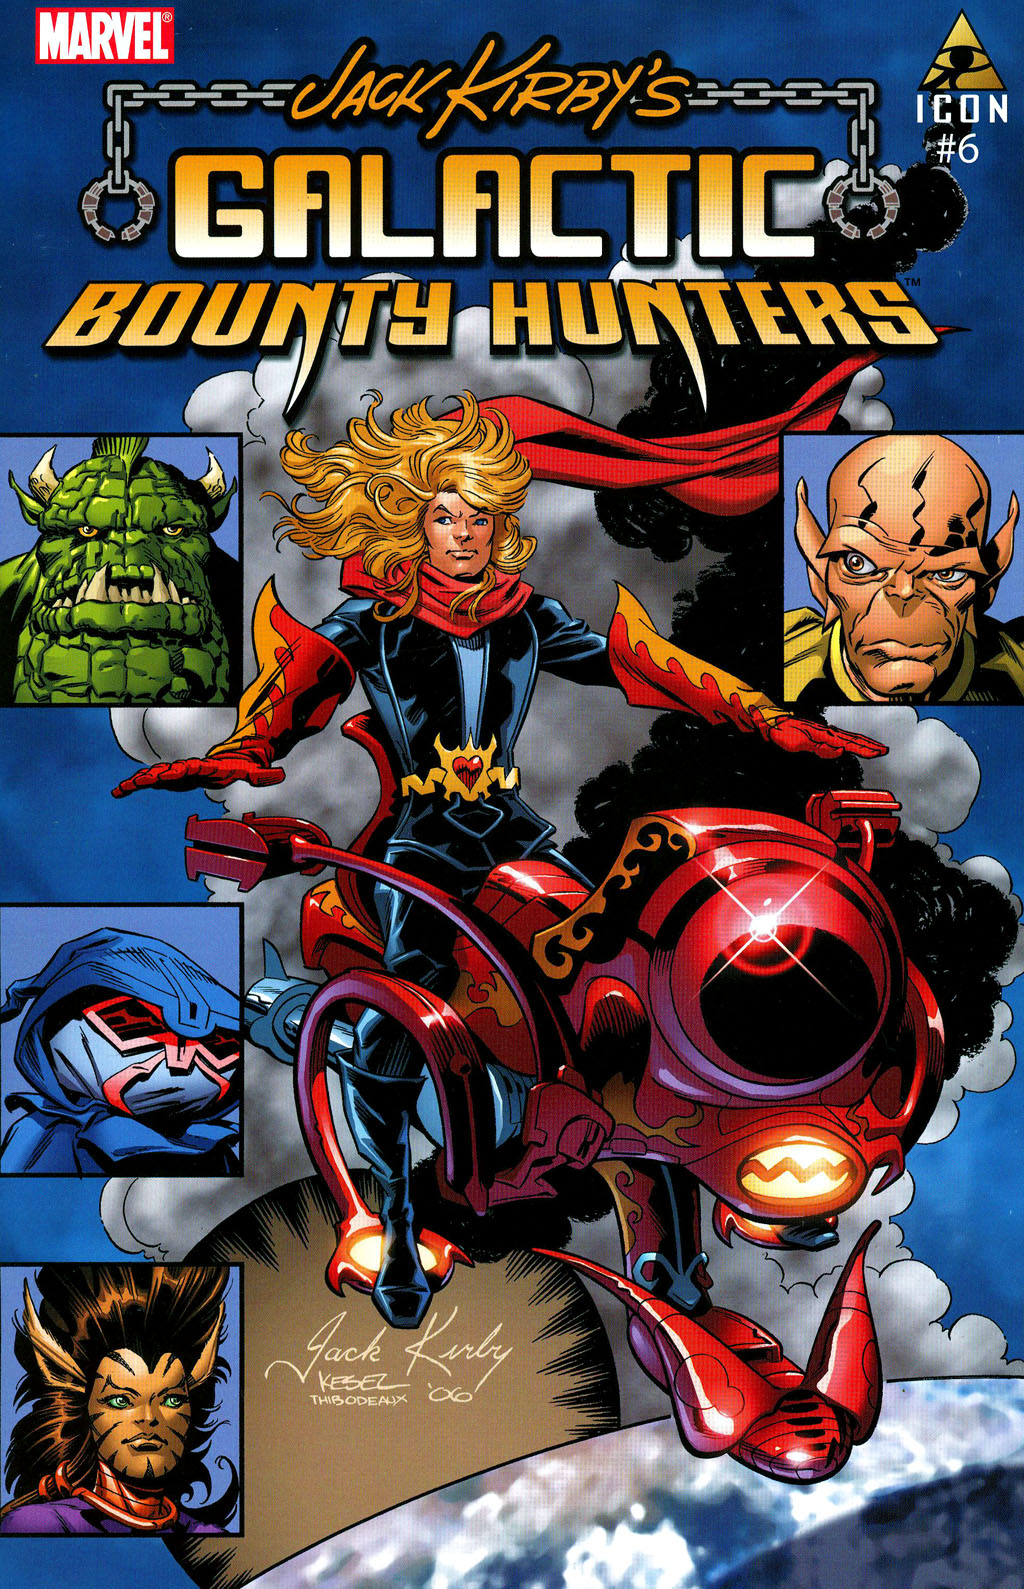 Read online Jack Kirby's Galactic Bounty Hunters comic -  Issue #6 - 1